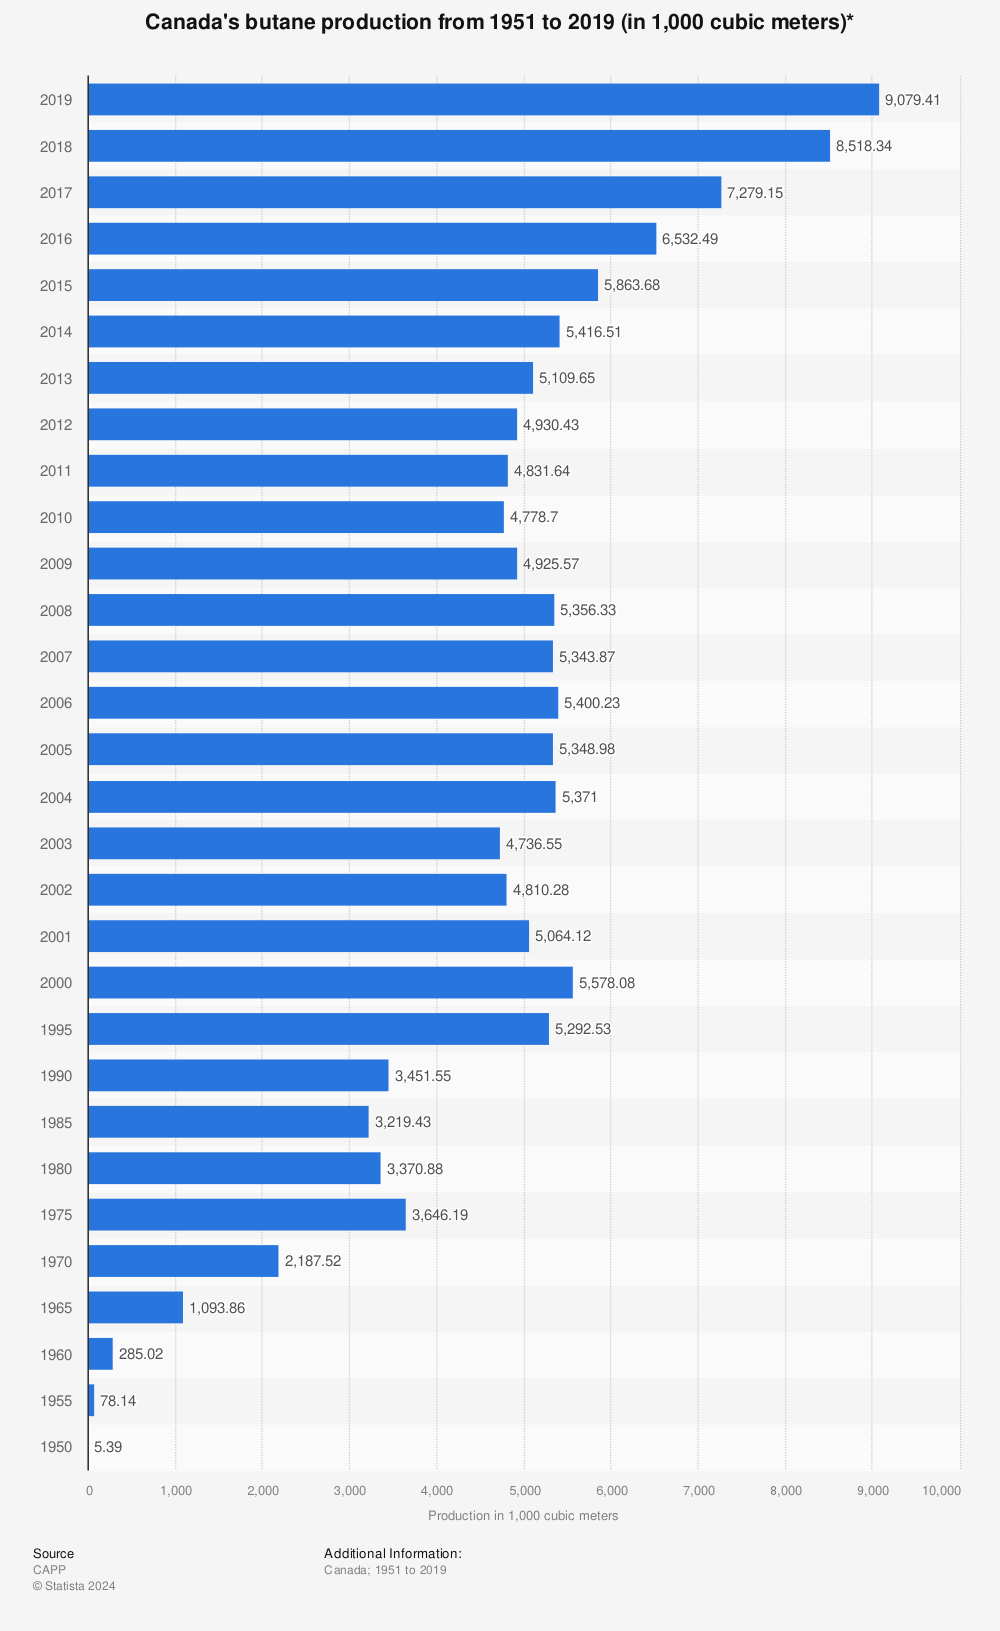 Statistic: Canada's butane production from 1951 to 2019 (in 1,000 cubic meters)* | Statista